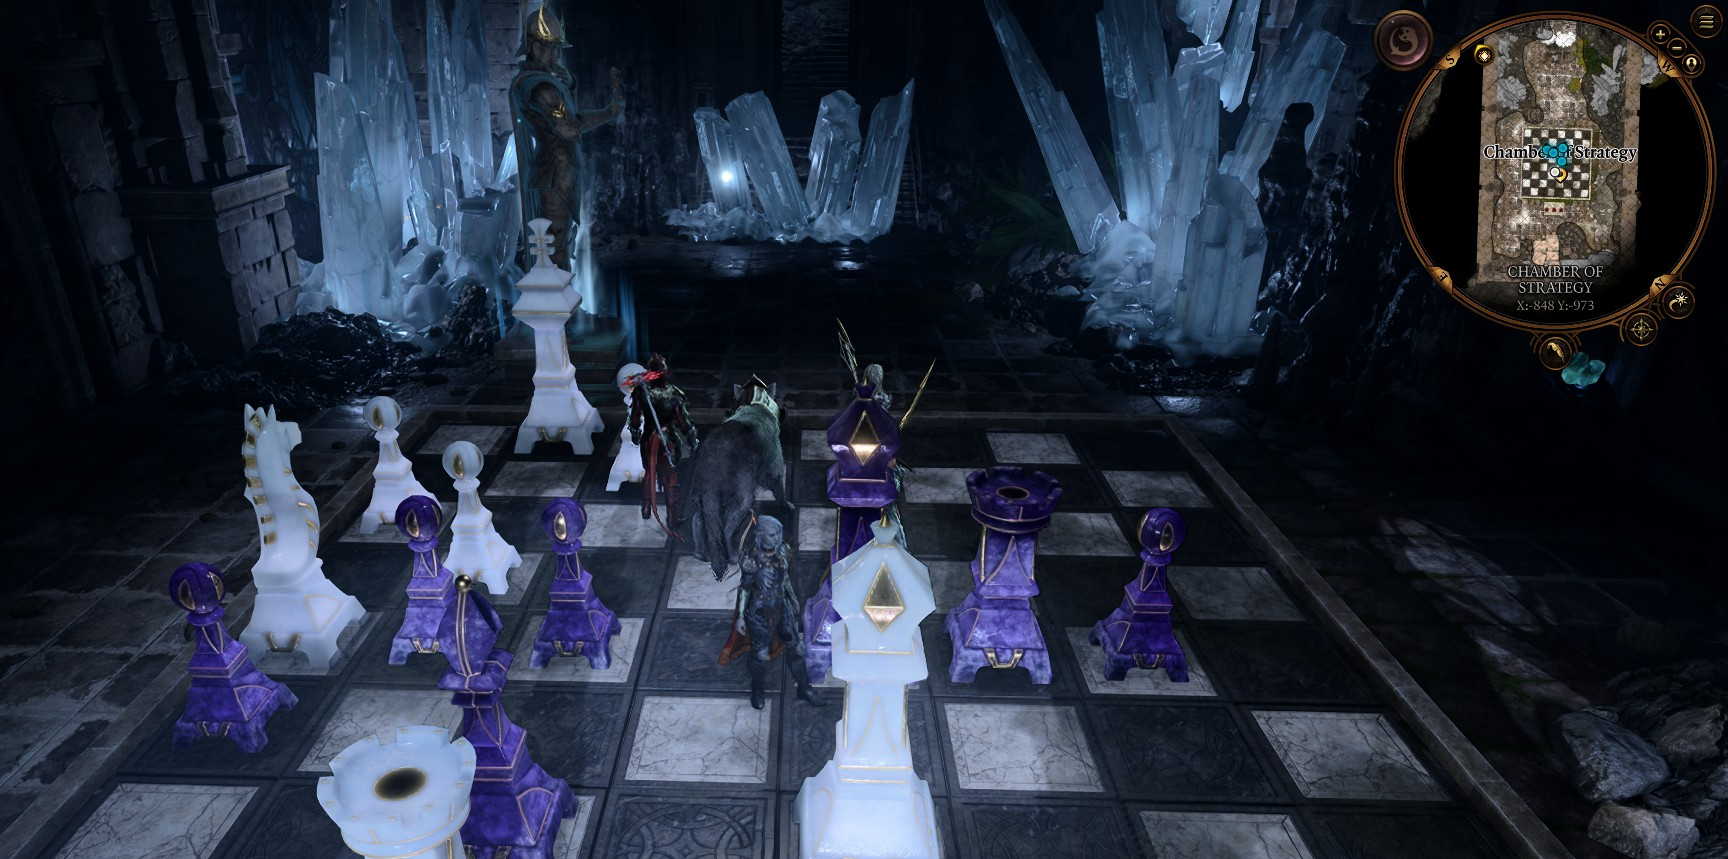 A party in Baldur's Gate 3 stands on a giant chessboard.